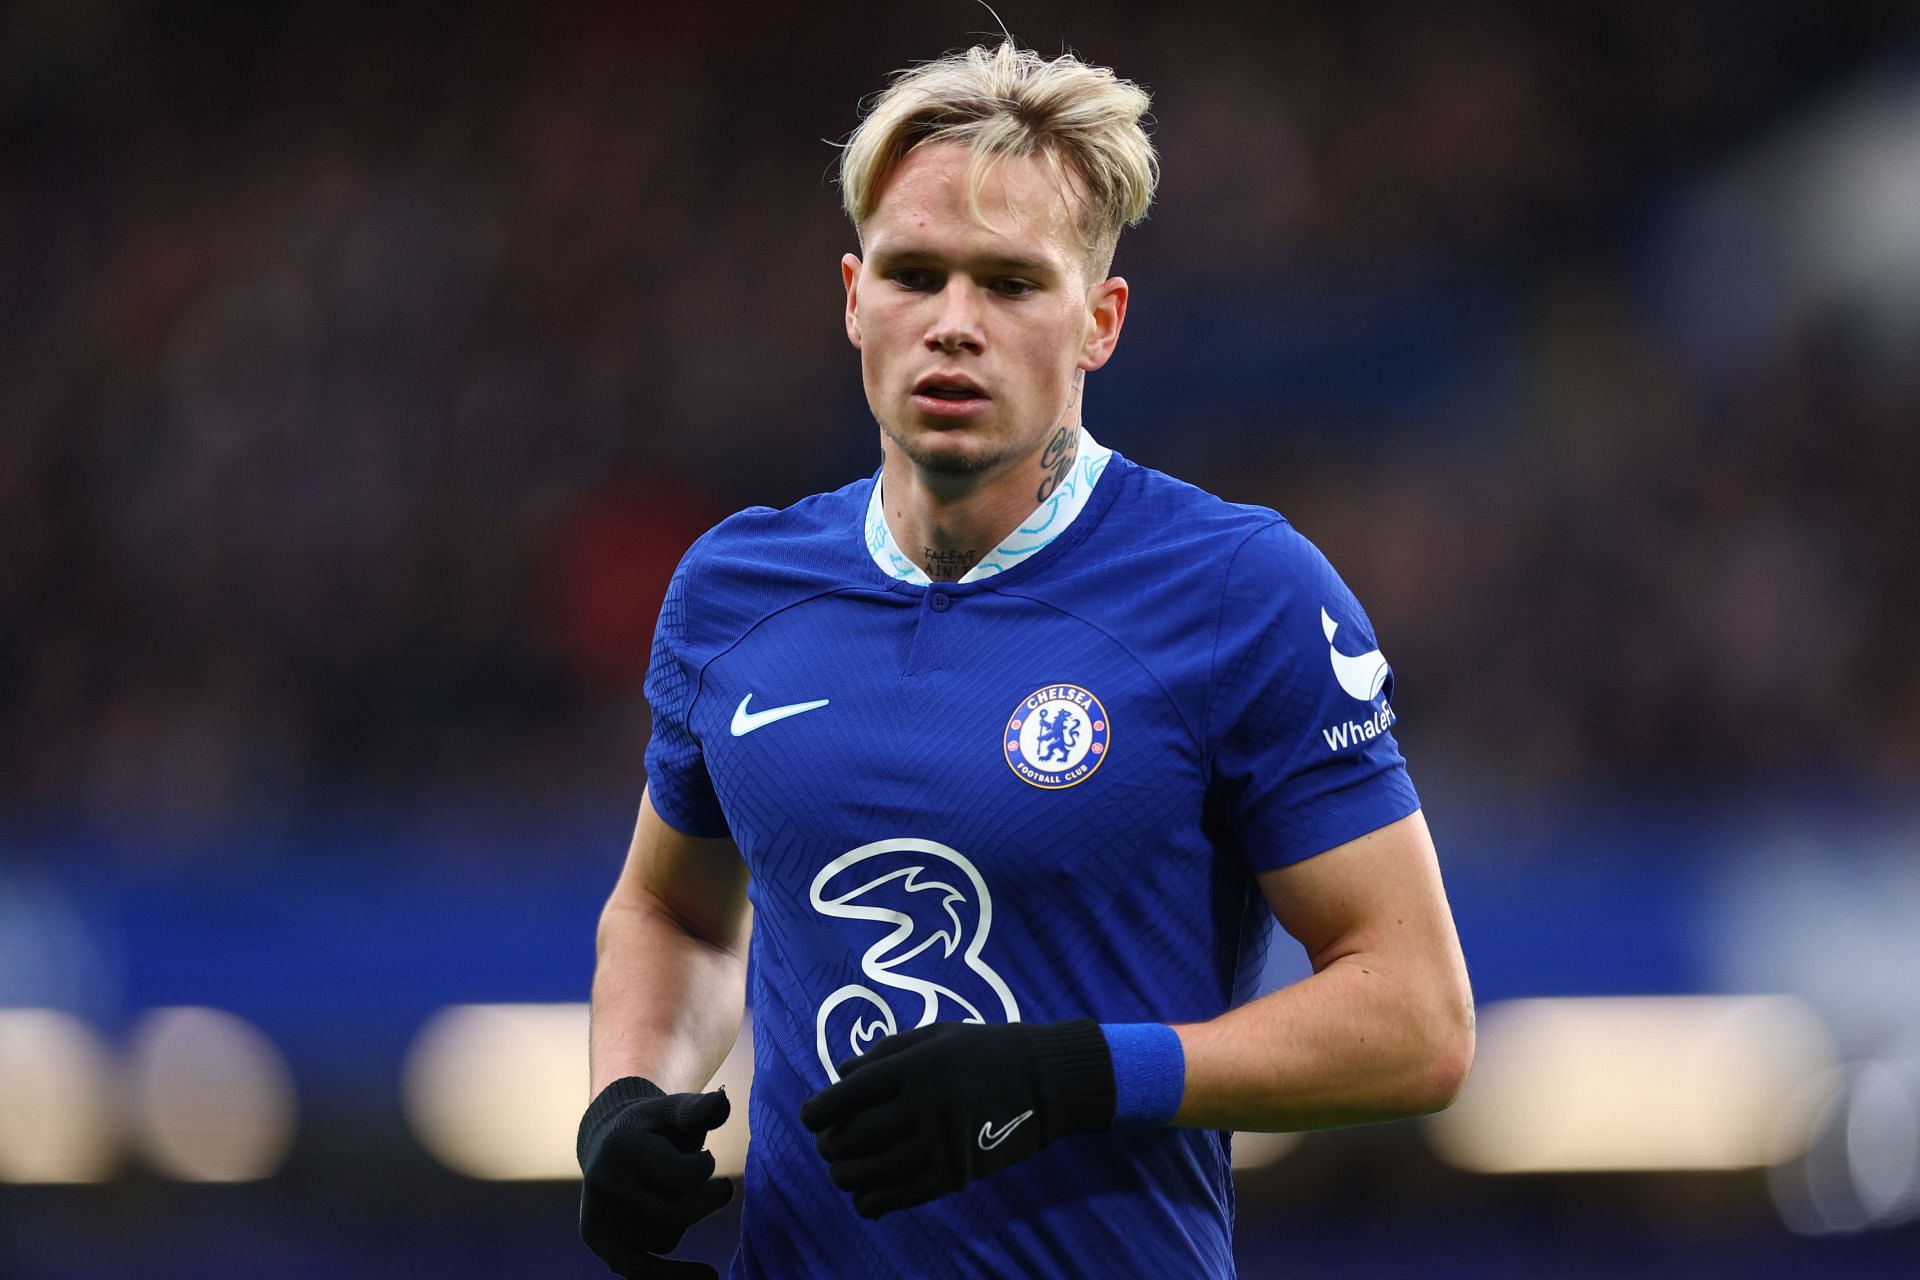 Mykhaylo Mudryk has failed to live up to the billing so far at Stamford Bridge.